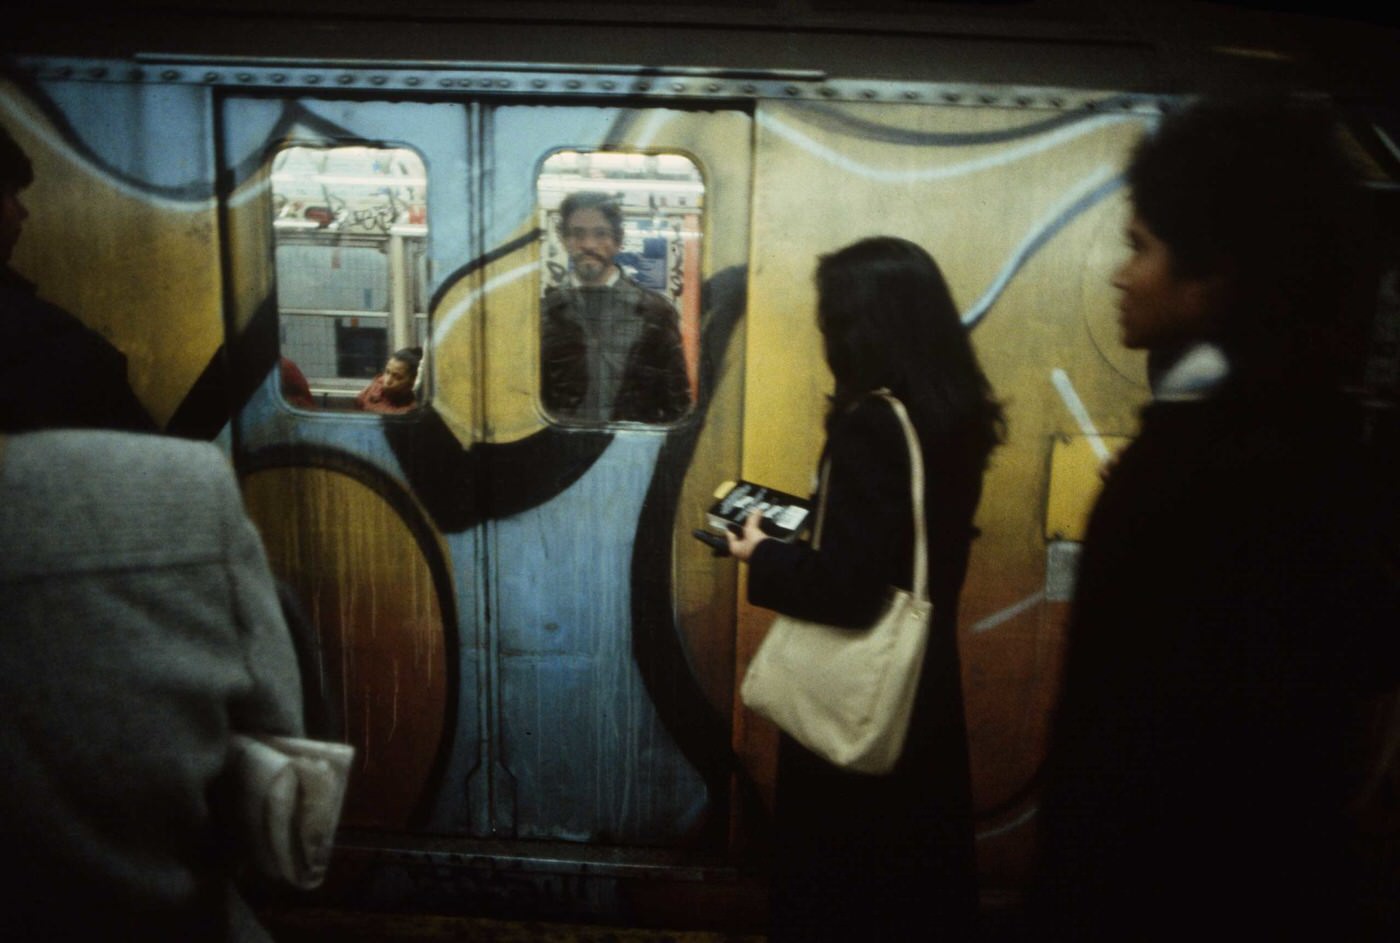 20 Nostalgic Photos Depicting a Gritty Journey Through New York City's Subway in 1981 by Christopher Morris